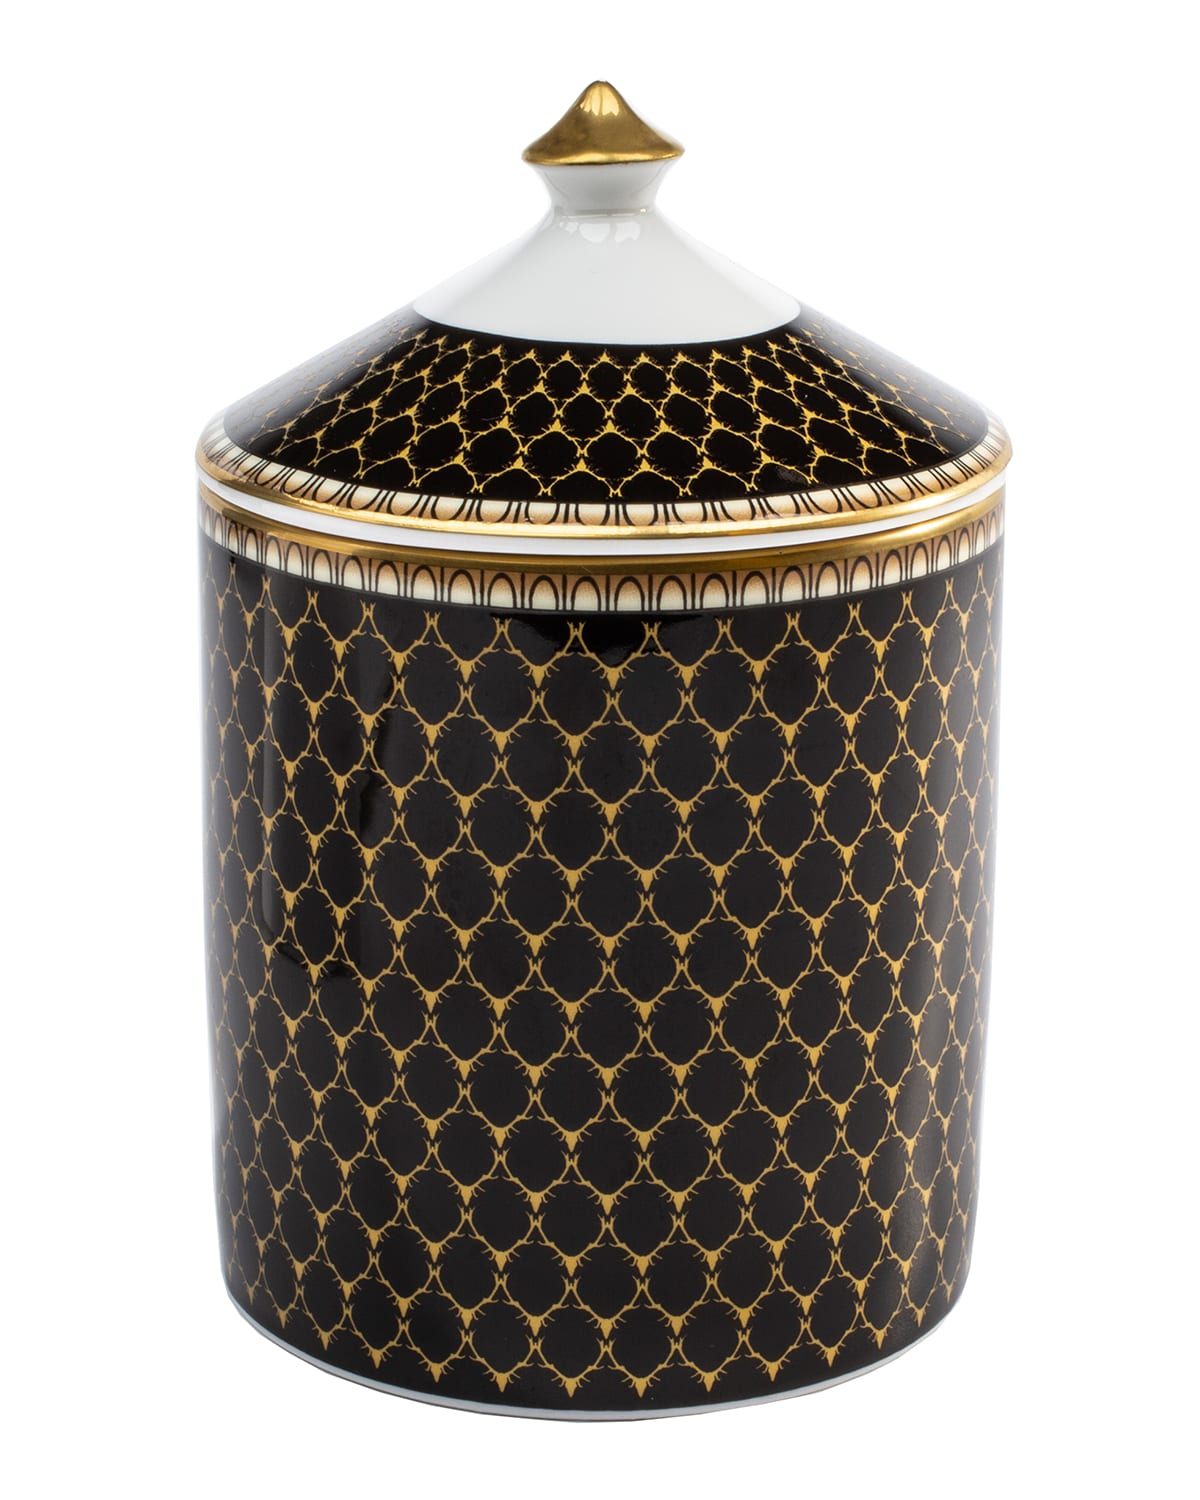 Halcyon Days Antler Trellis Lidded Candle In Oud Imperial